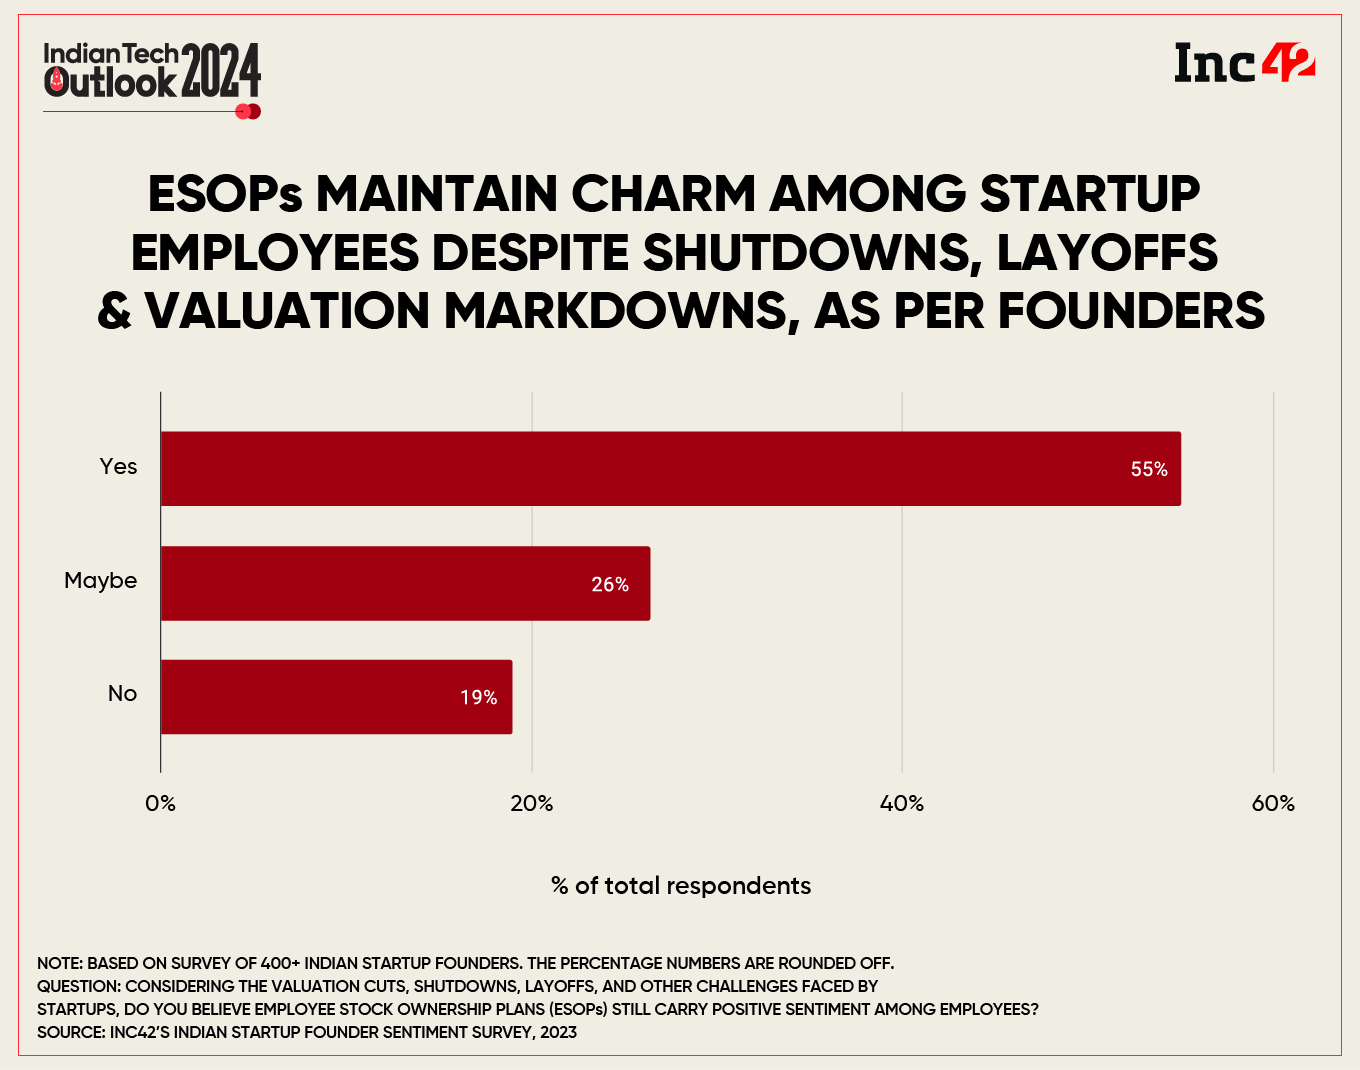 ESOPs Maintain Charm Among Startup Employees Despite Shutdowns, Layoffs & Valuation Markdowns, As Per Founders